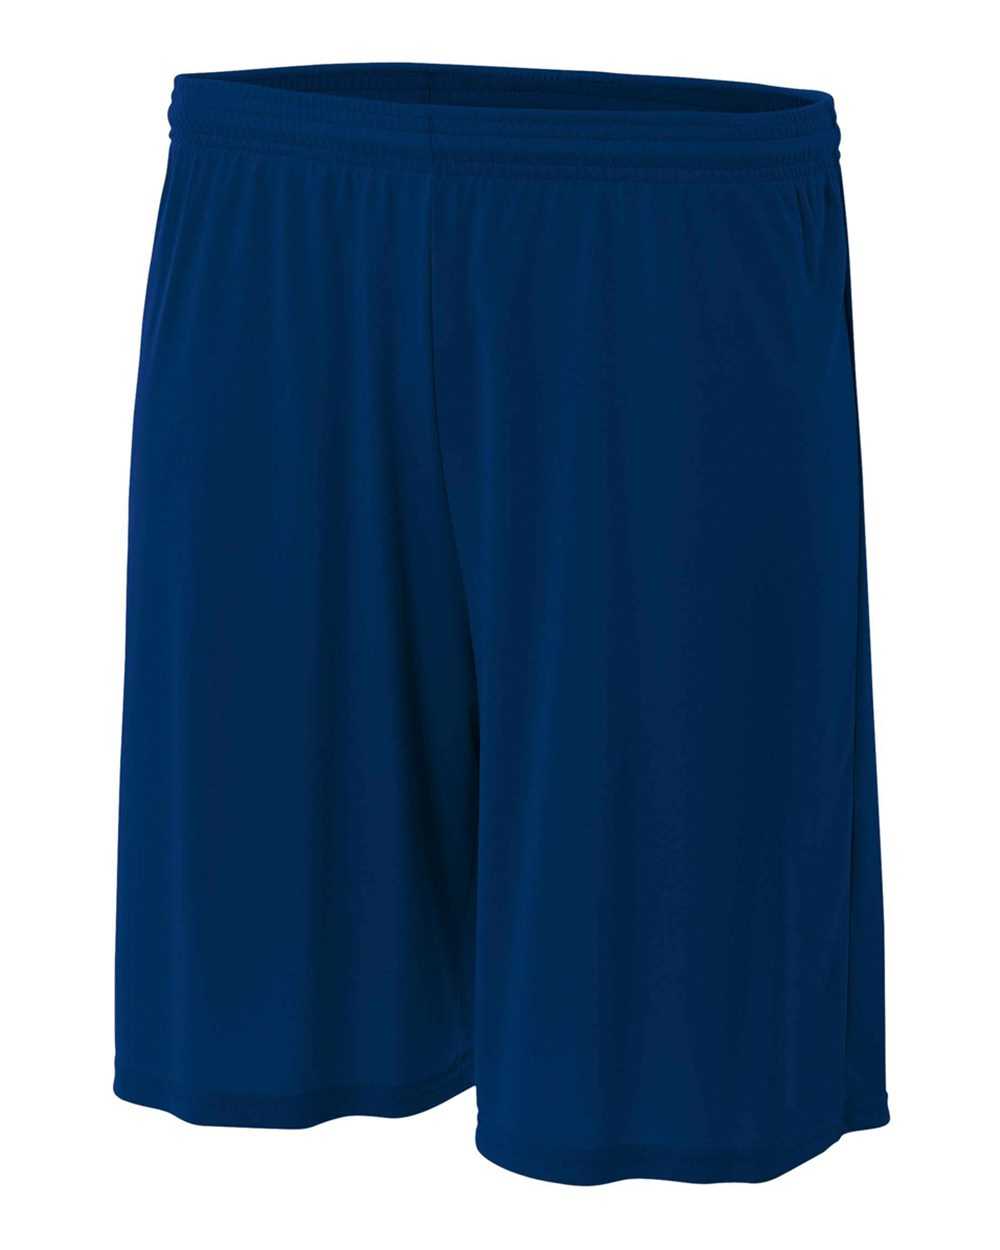 A4 N5244 7" Cooling Performance Short - Navy - HIT a Double